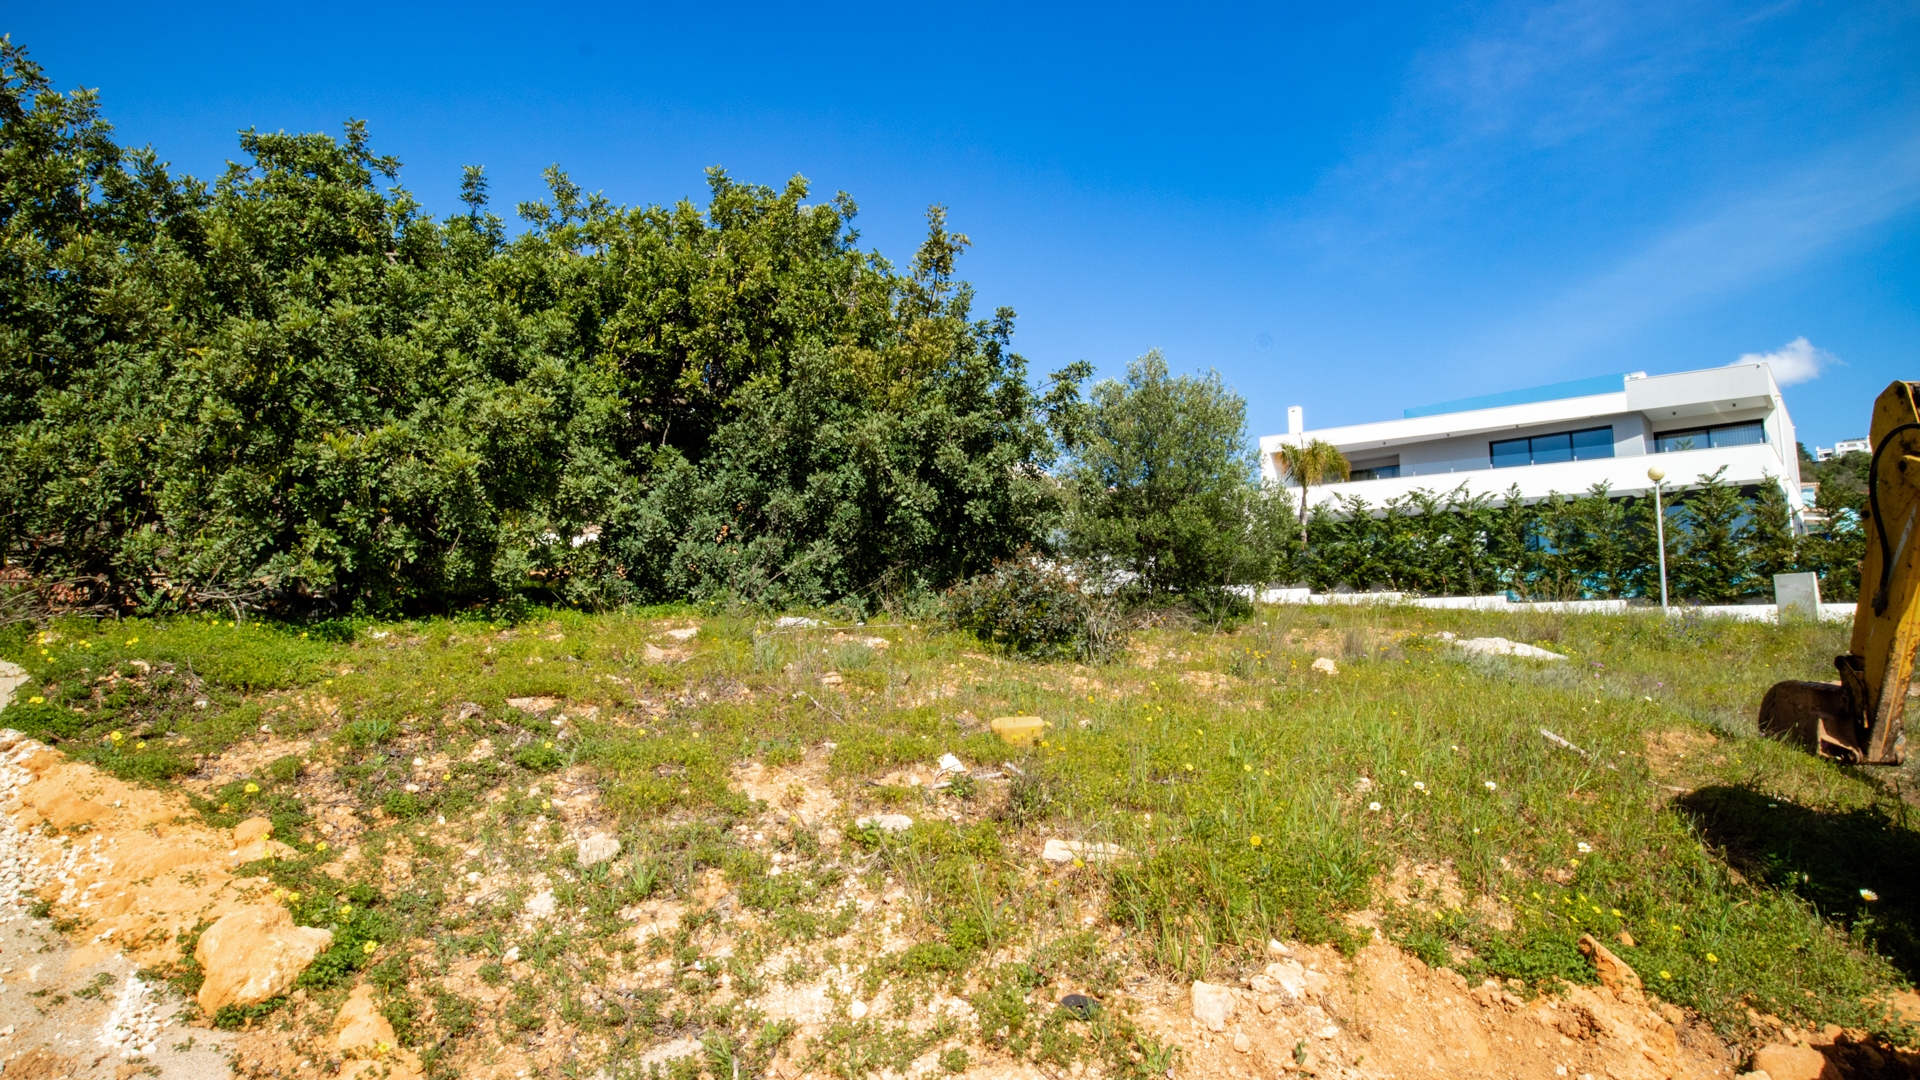 Plot with Sea Views & Building Permission near Albufeira Marina | VM1641 This urban plot is located in a prime position near Albufeira Marina, close to amenities and with good sea views from the villa once built.